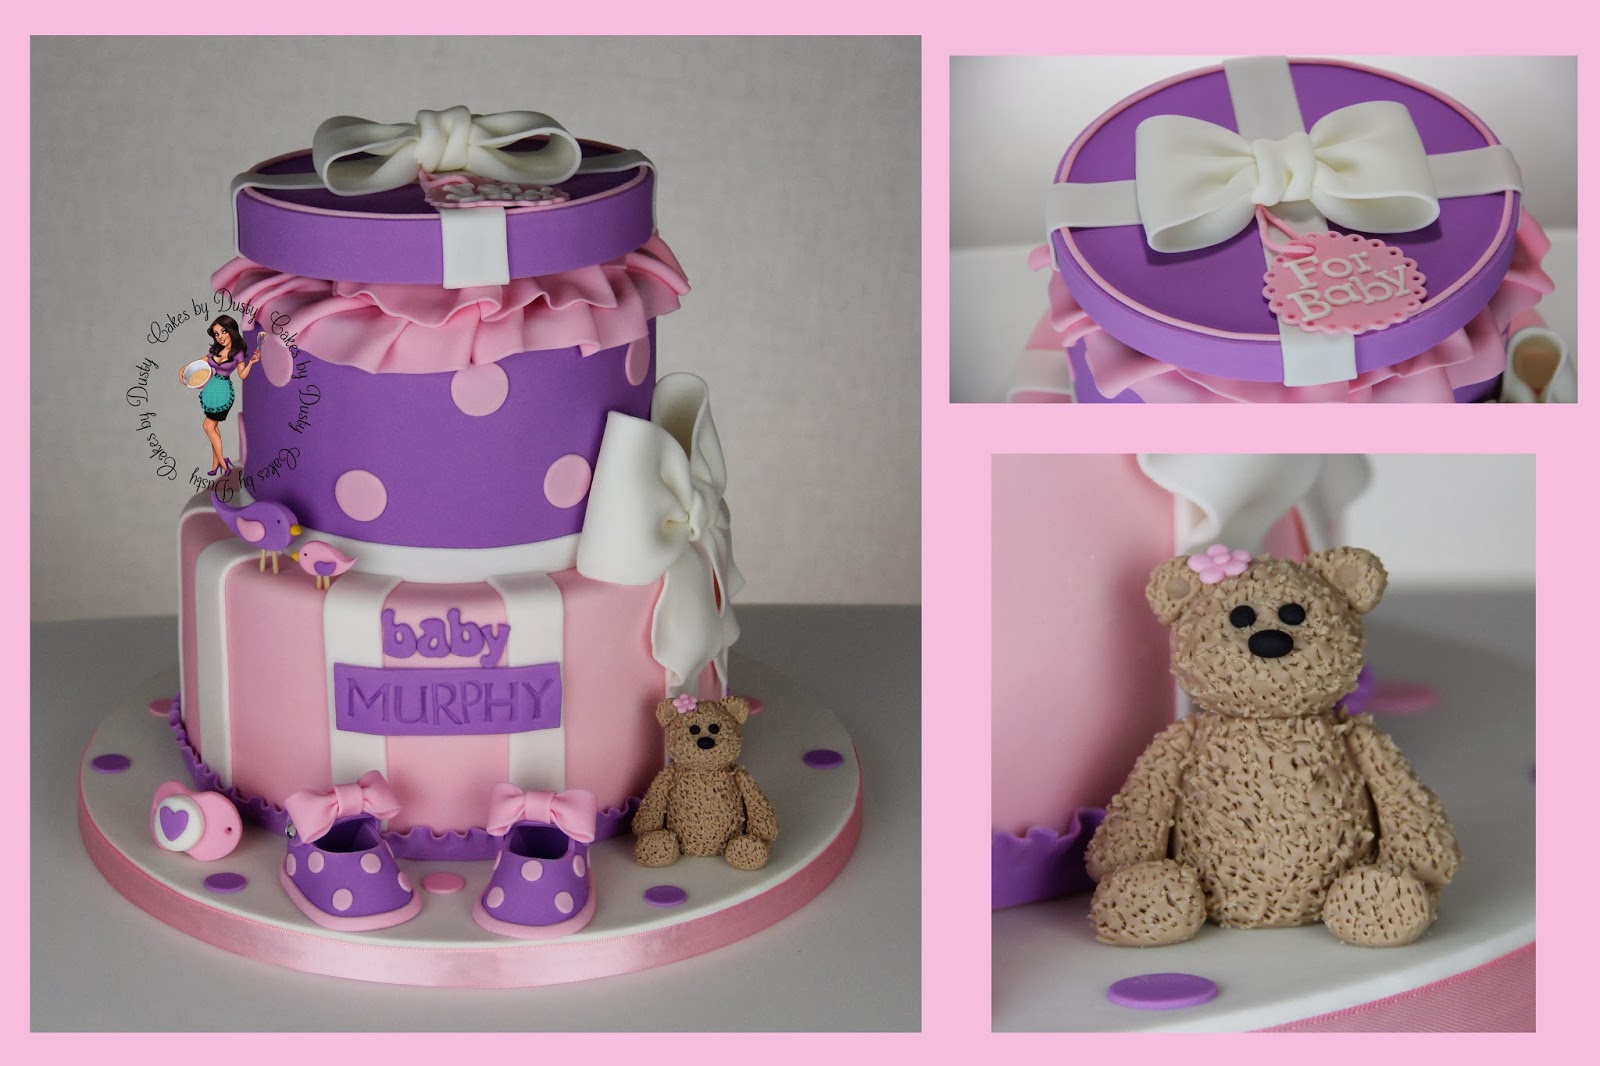 Cakes by Dusty: Welcome Baby Murphy1600 x 1066